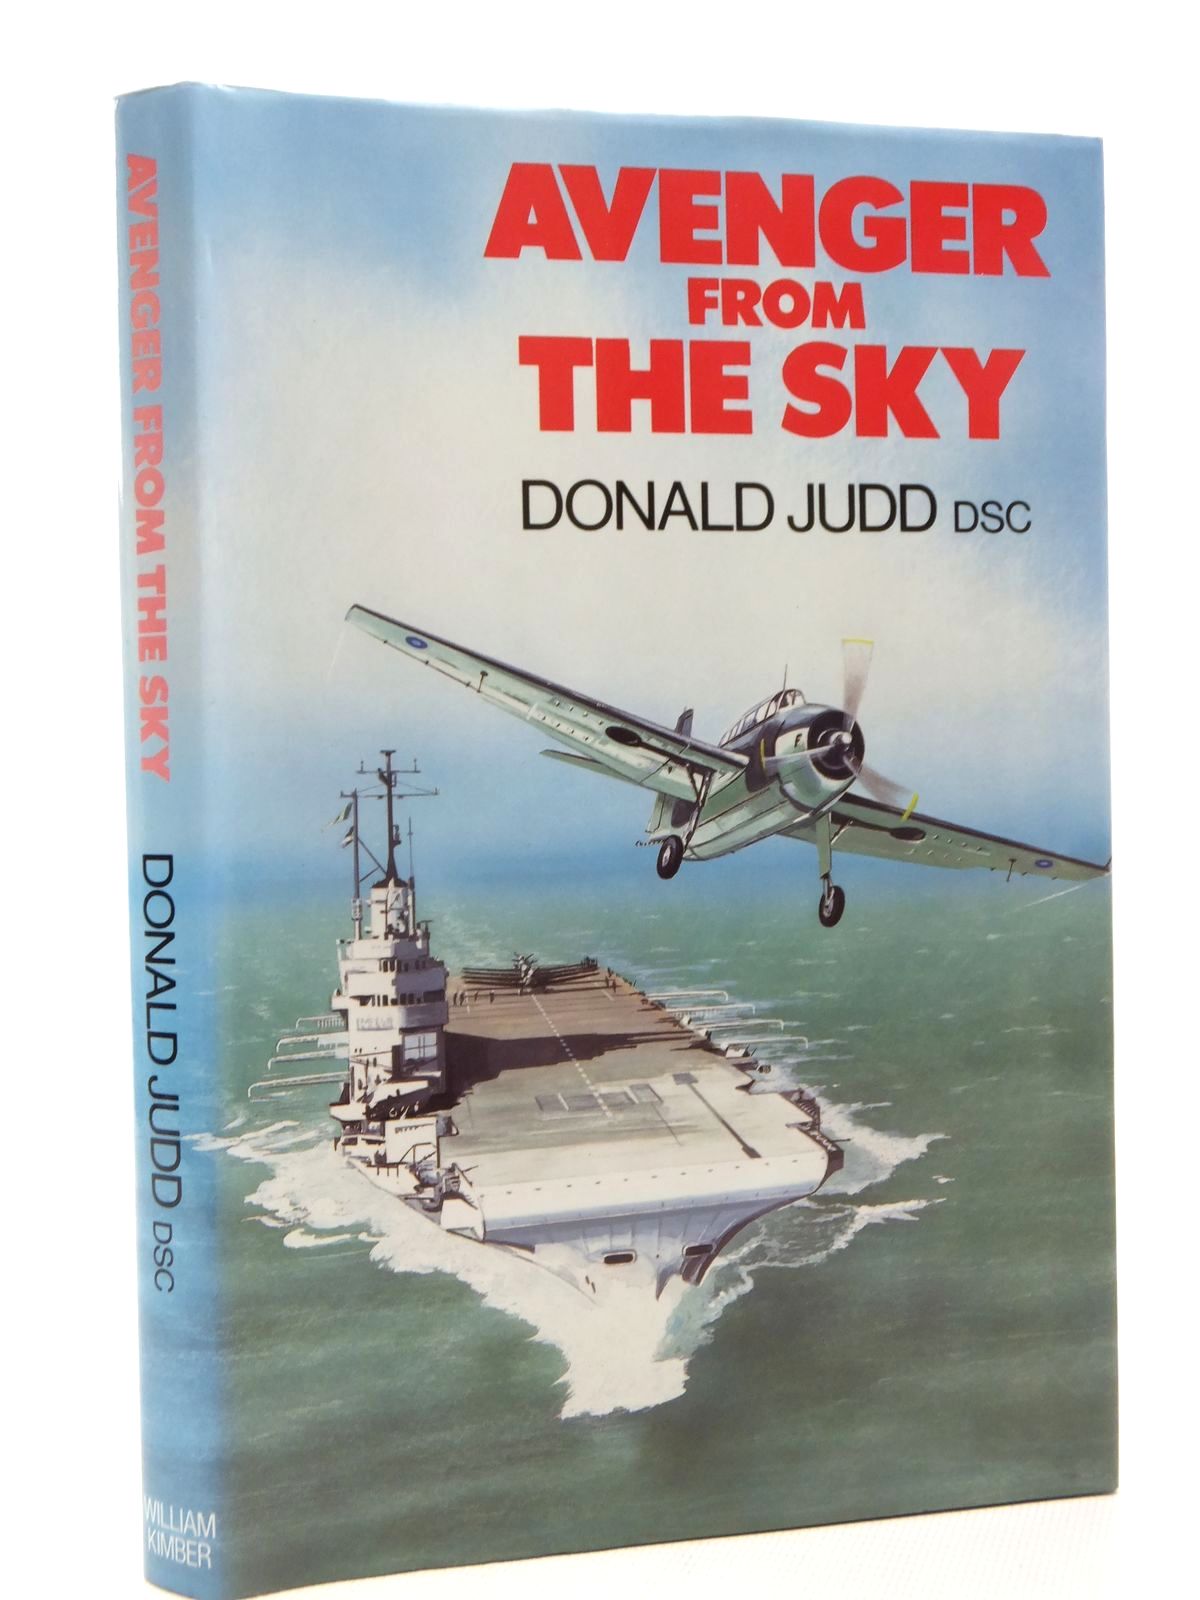 Photo of AVENGER FROM THE SKY written by Judd, Donald published by William Kimber (STOCK CODE: 1610085)  for sale by Stella & Rose's Books